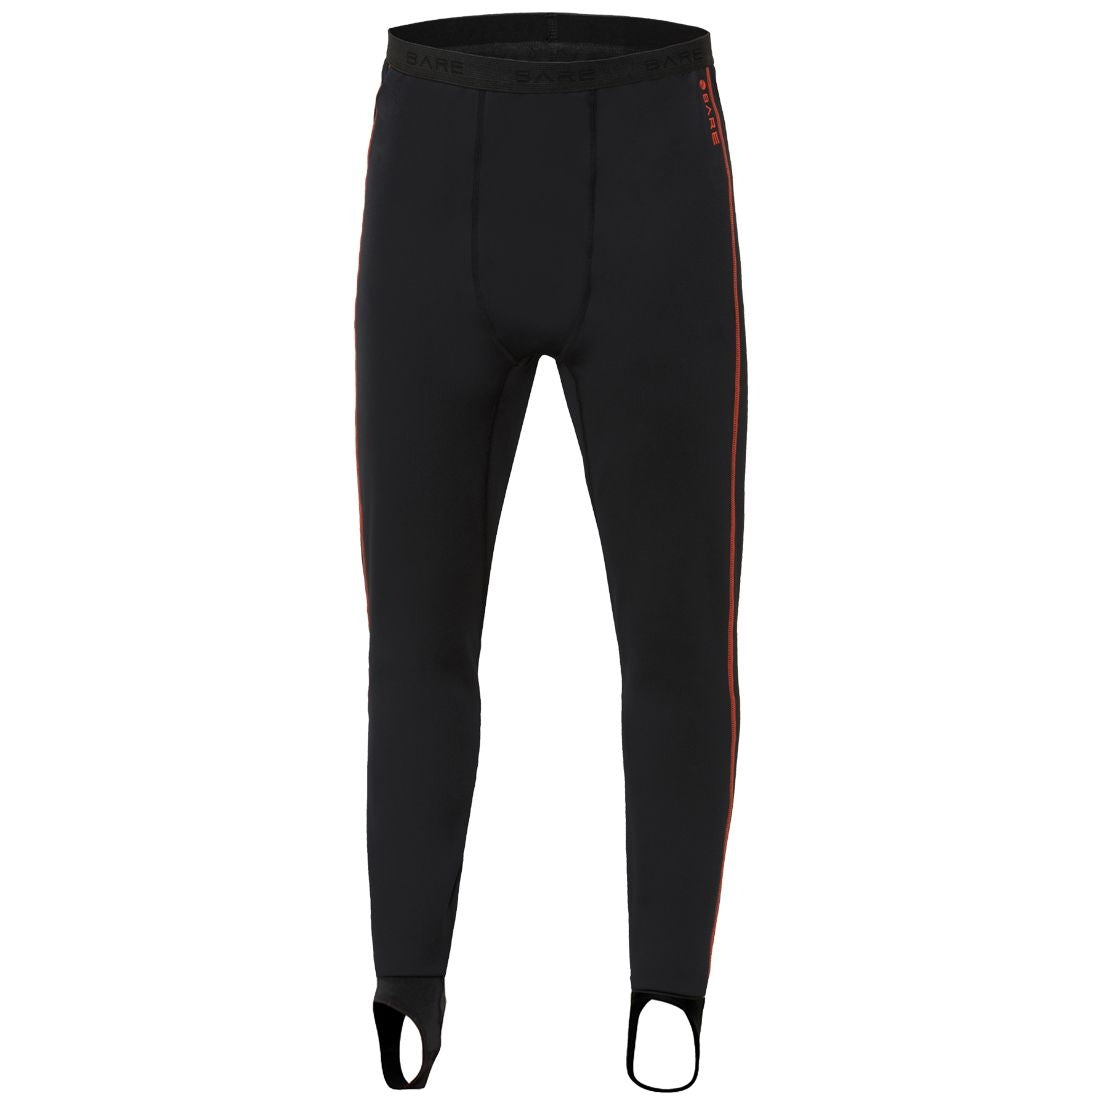 BARE SB System Mid Layer Full Suit - Mens Dry Undergarment